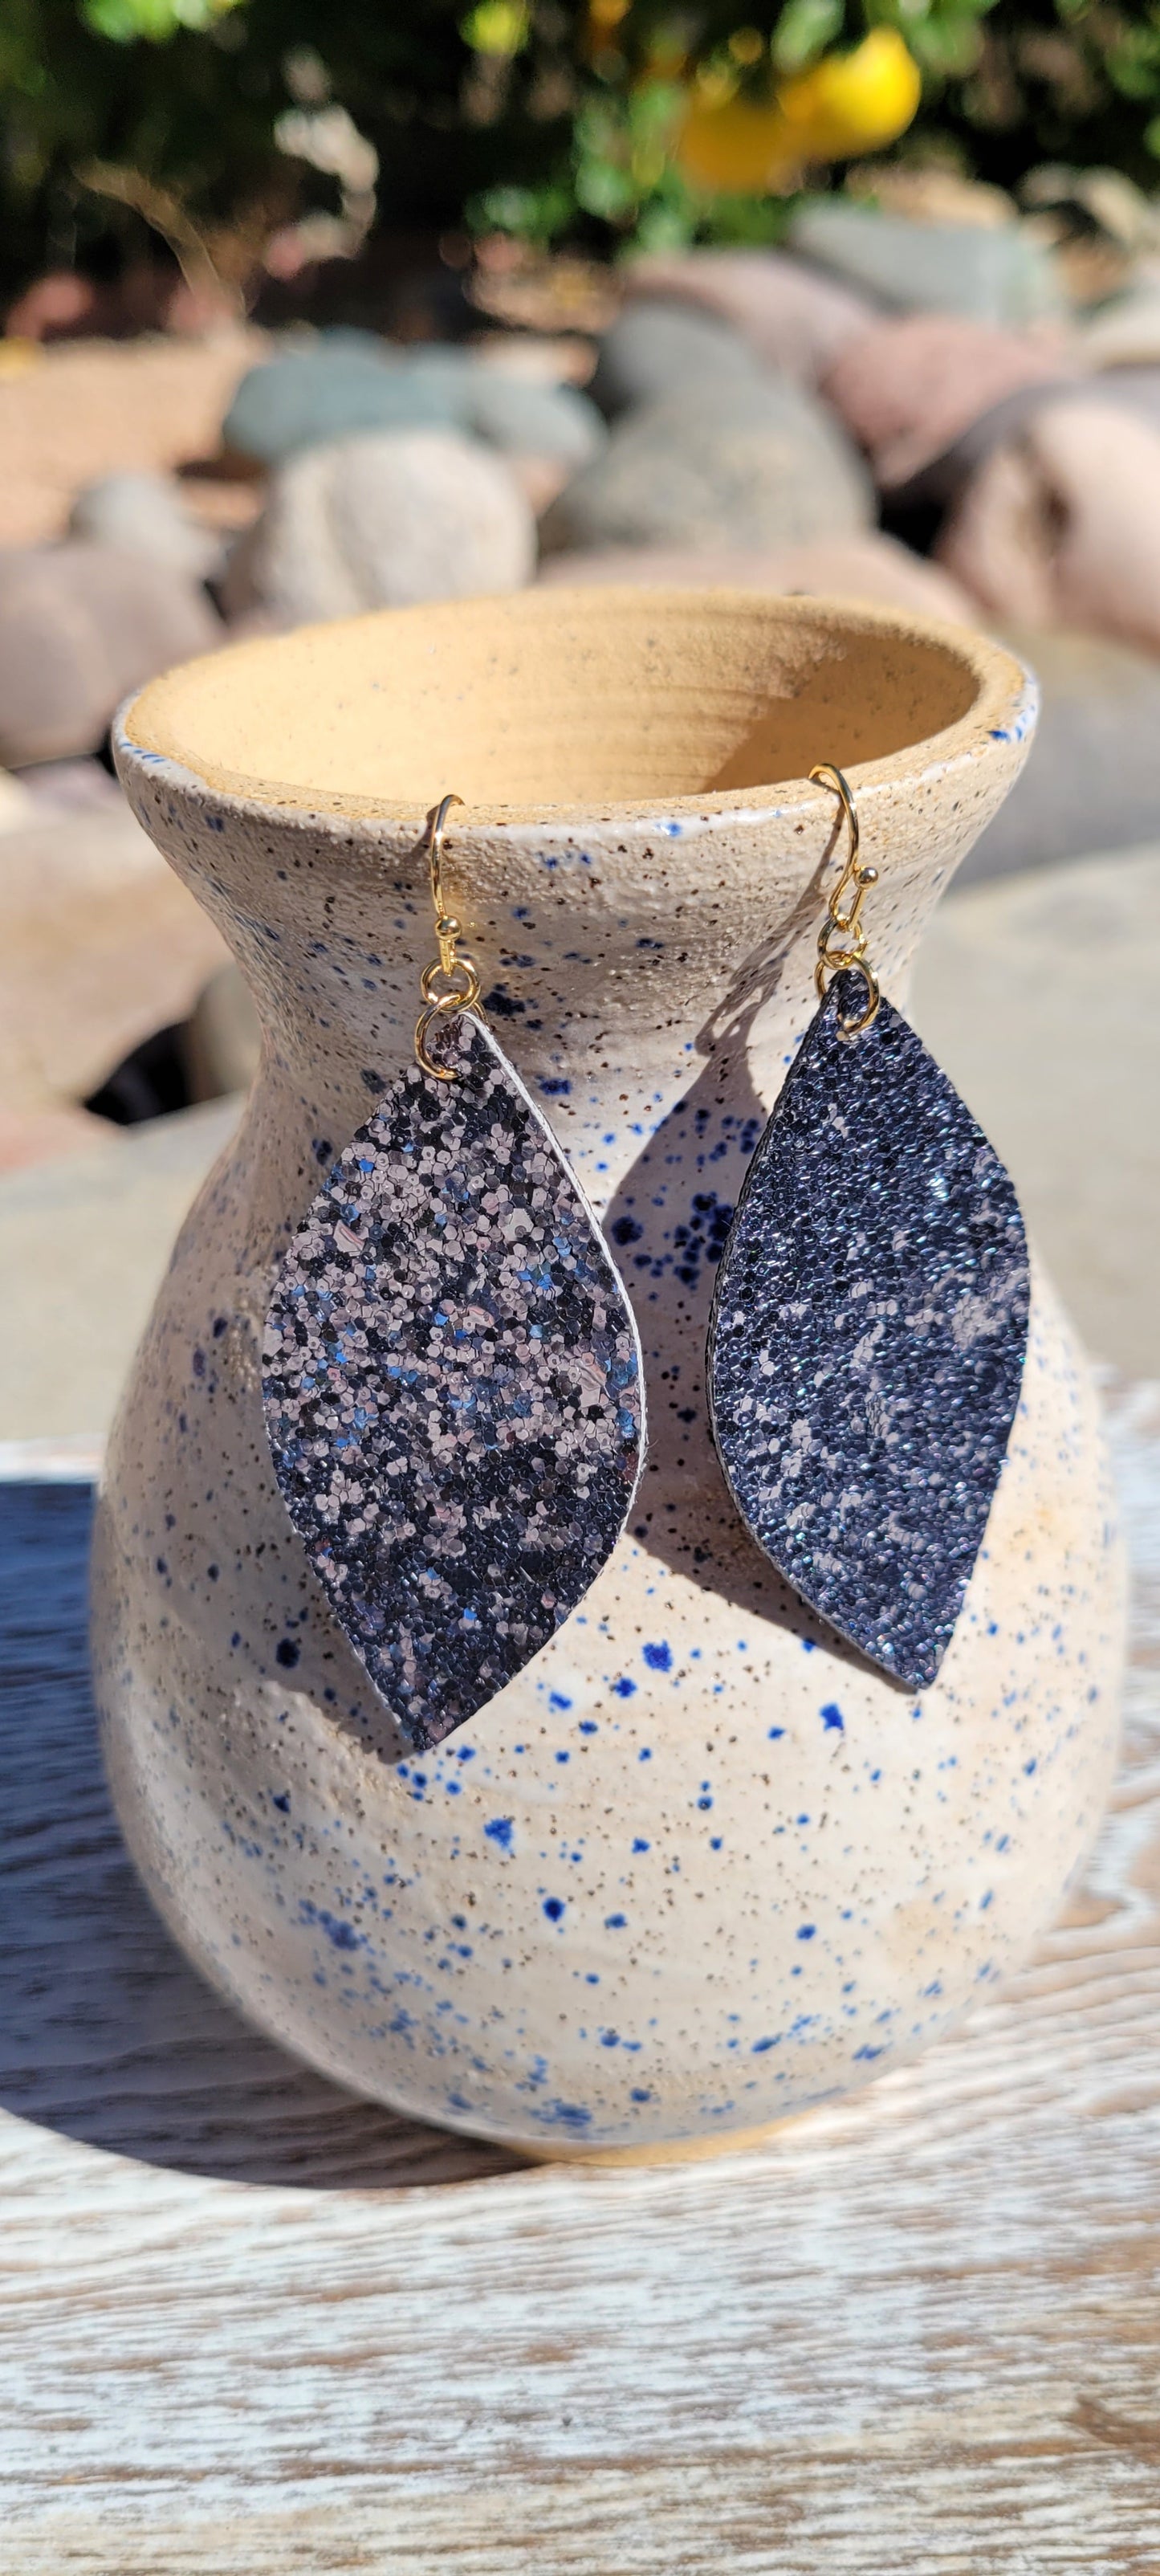 Marquise shape Pewter glitter and sequins Brushed gold fish hook dangle earrings Rubber earring back Length 3” Whether you want to be on the wild side or classy this earring set it will add a fun touch to your outfit